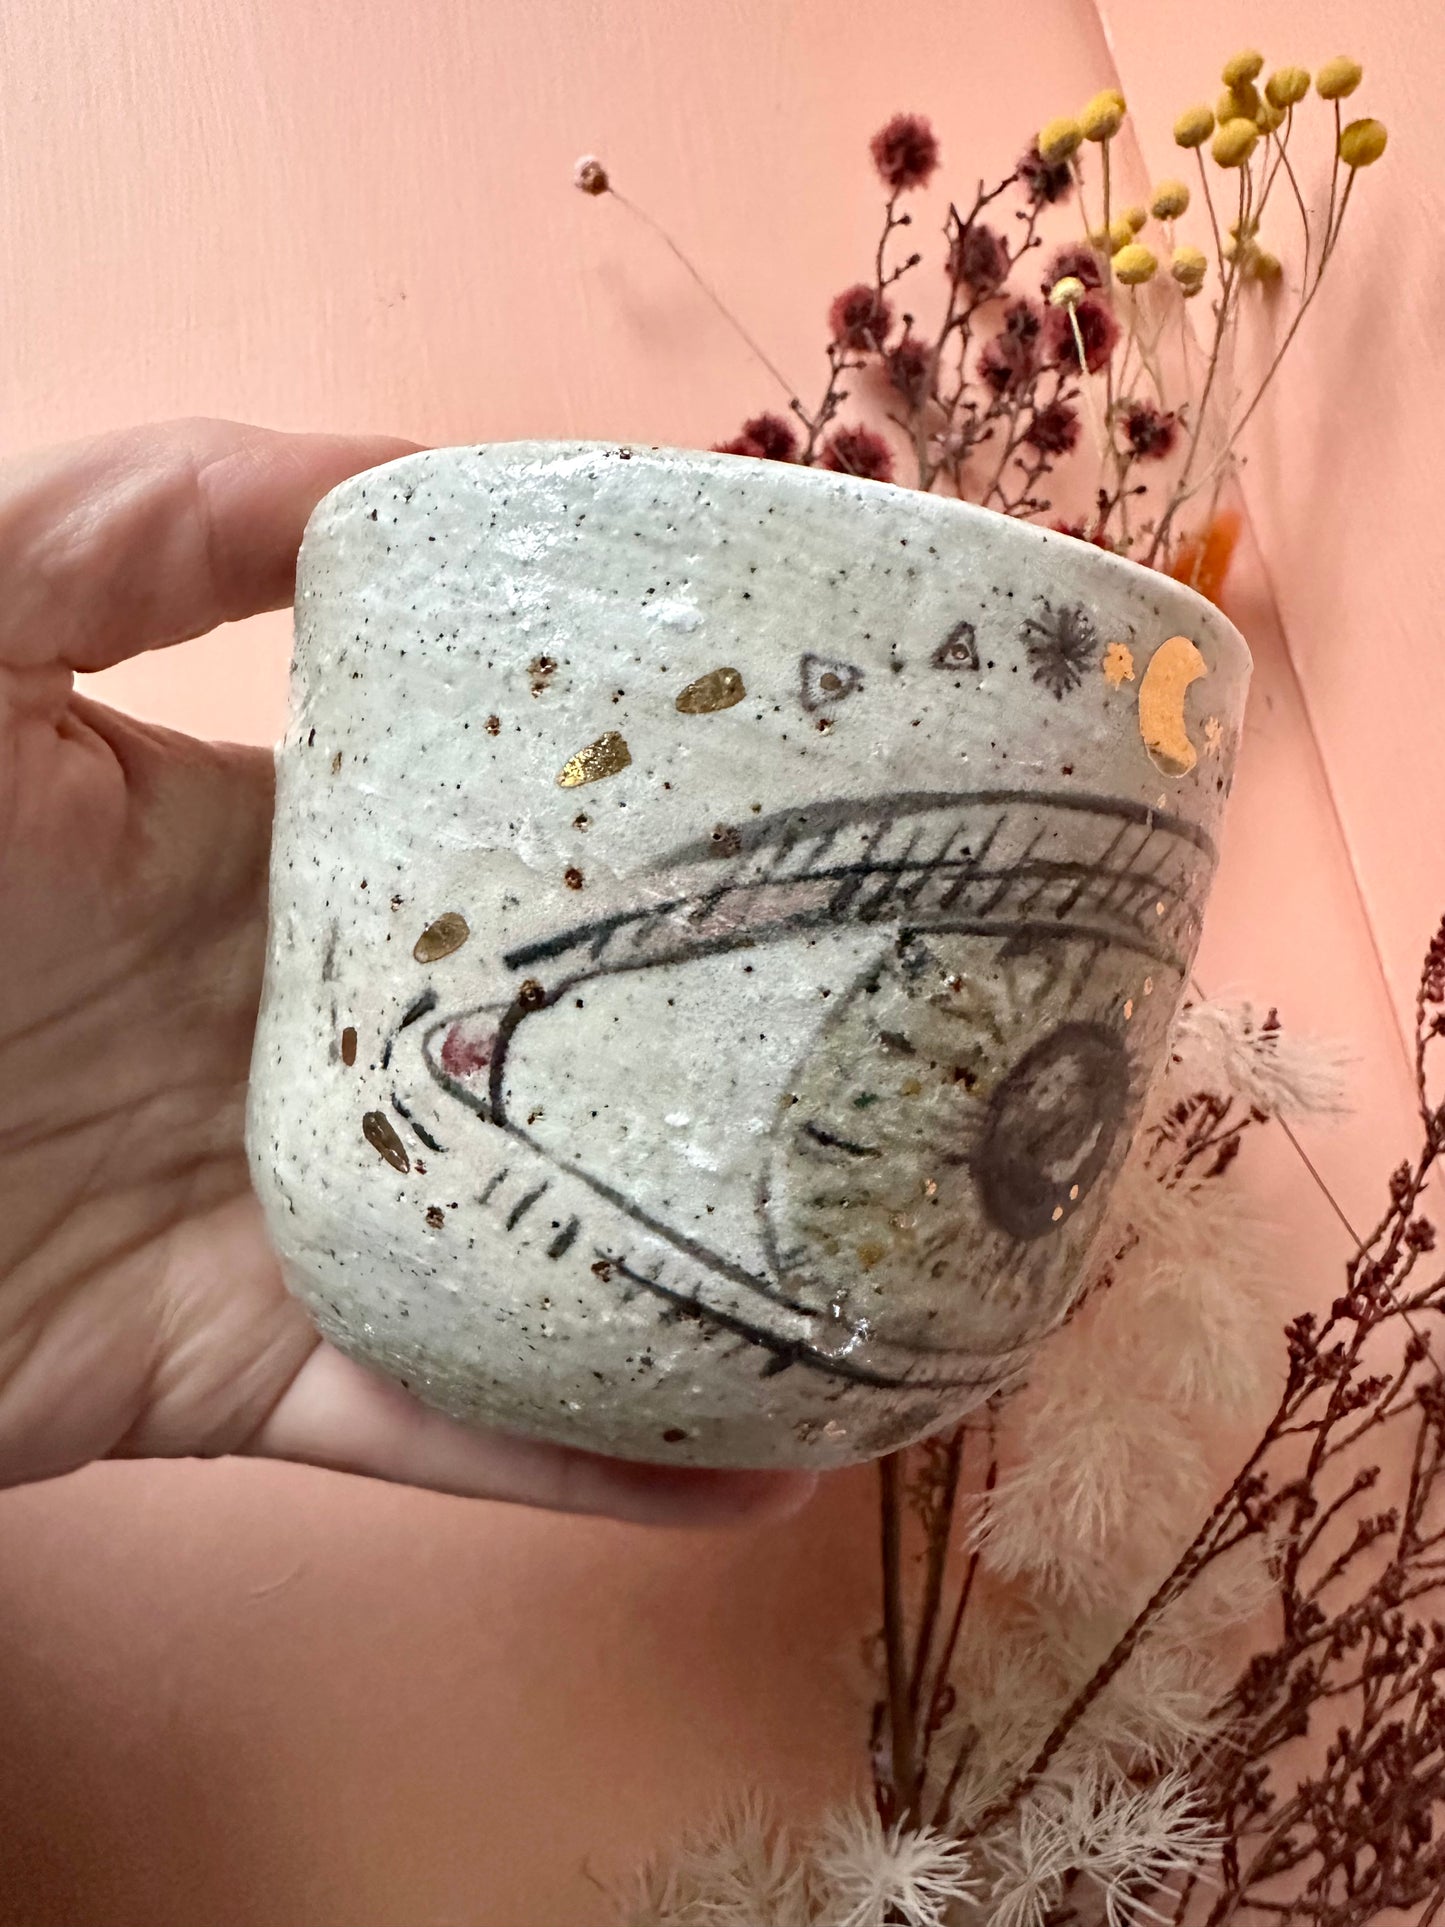 One ‘protective eye’ hand painted cup